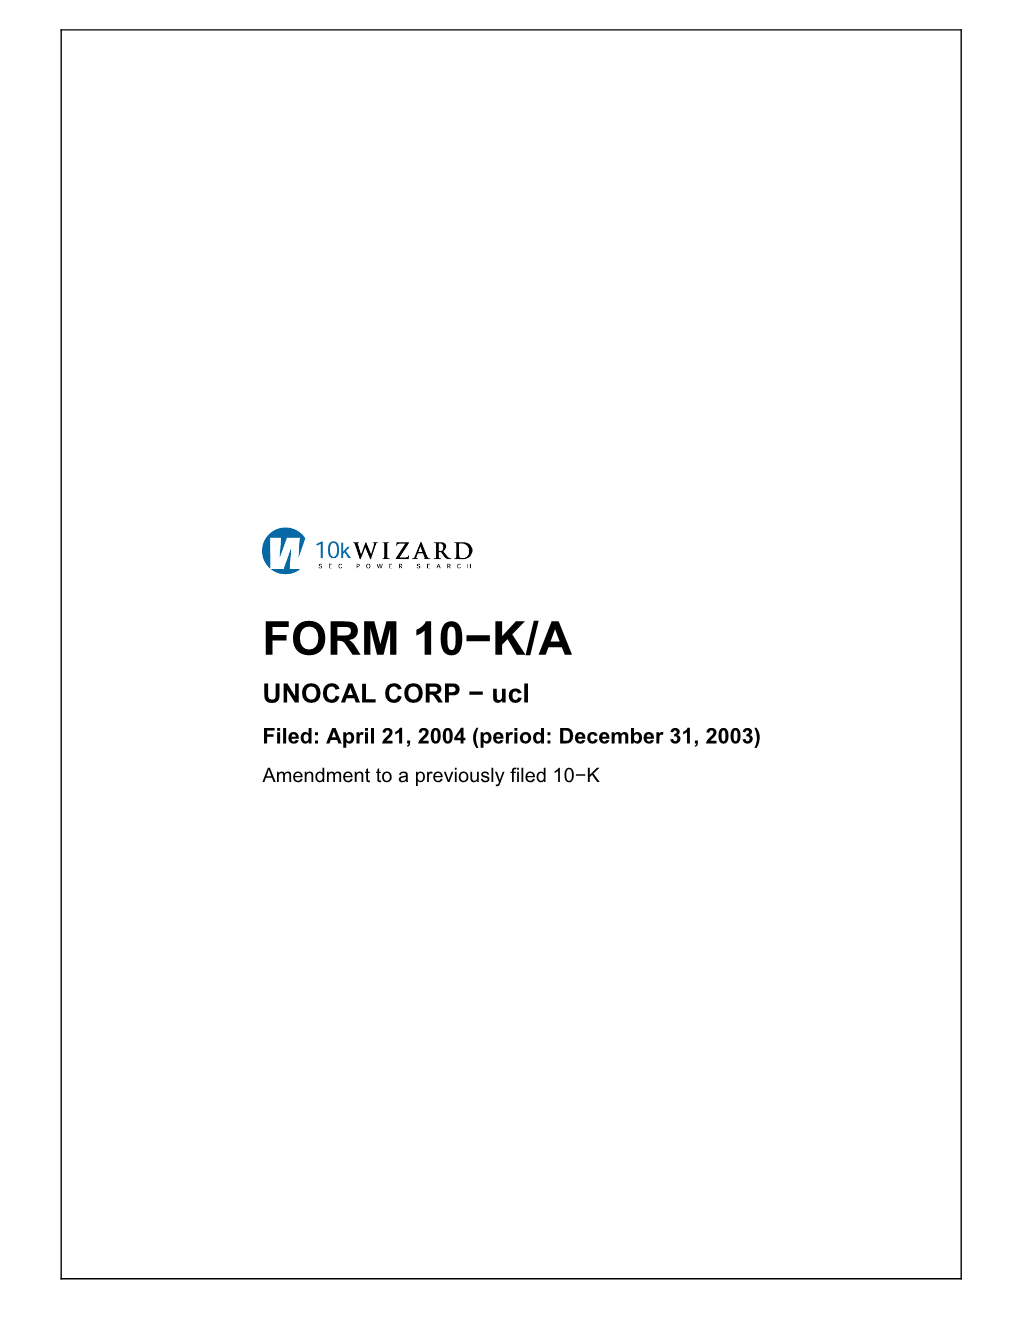 2003 Annual Report on Form 10-K/A